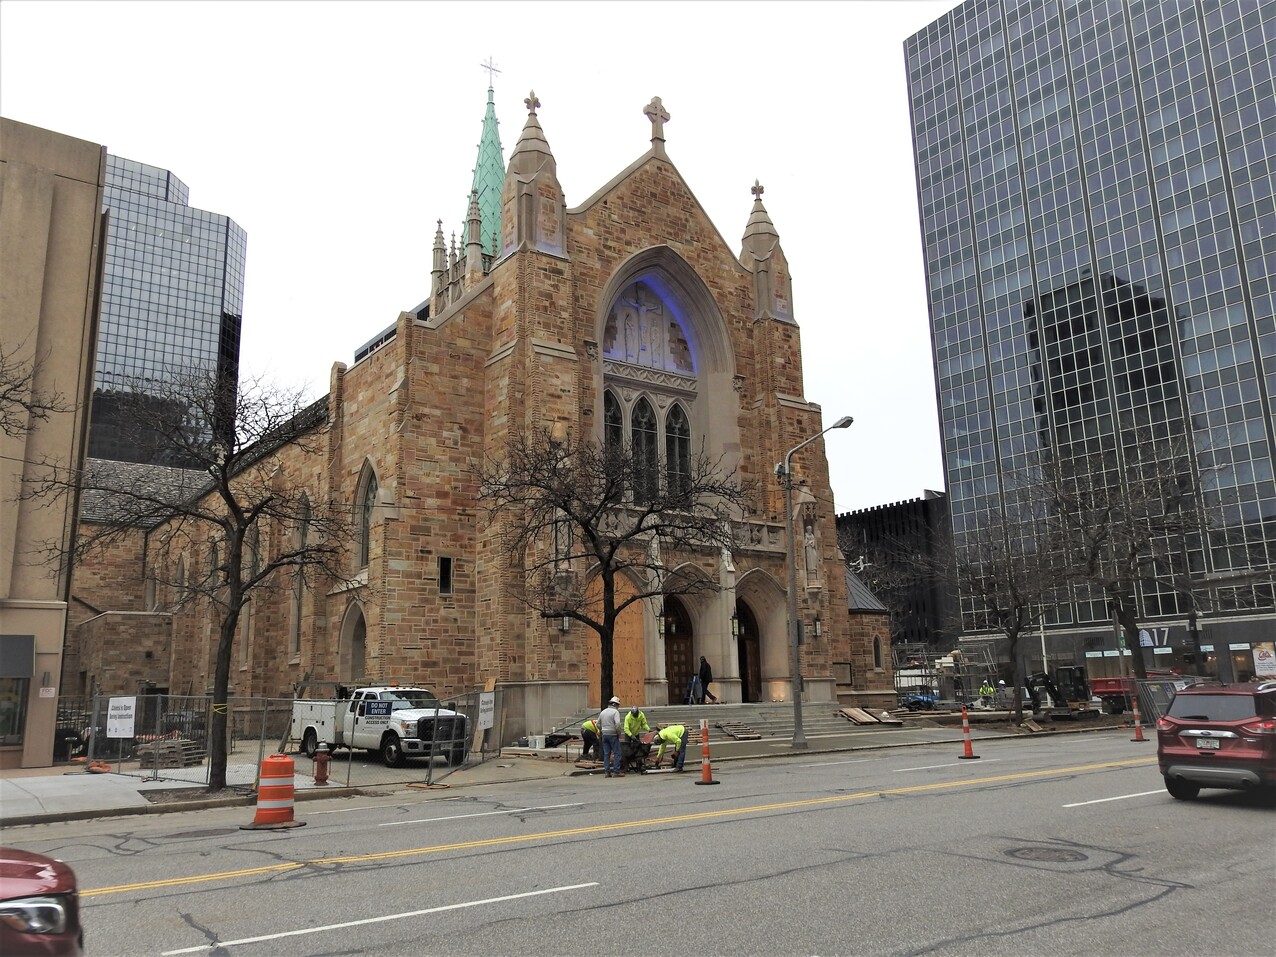 Exterior cathedral renovation project nears completion